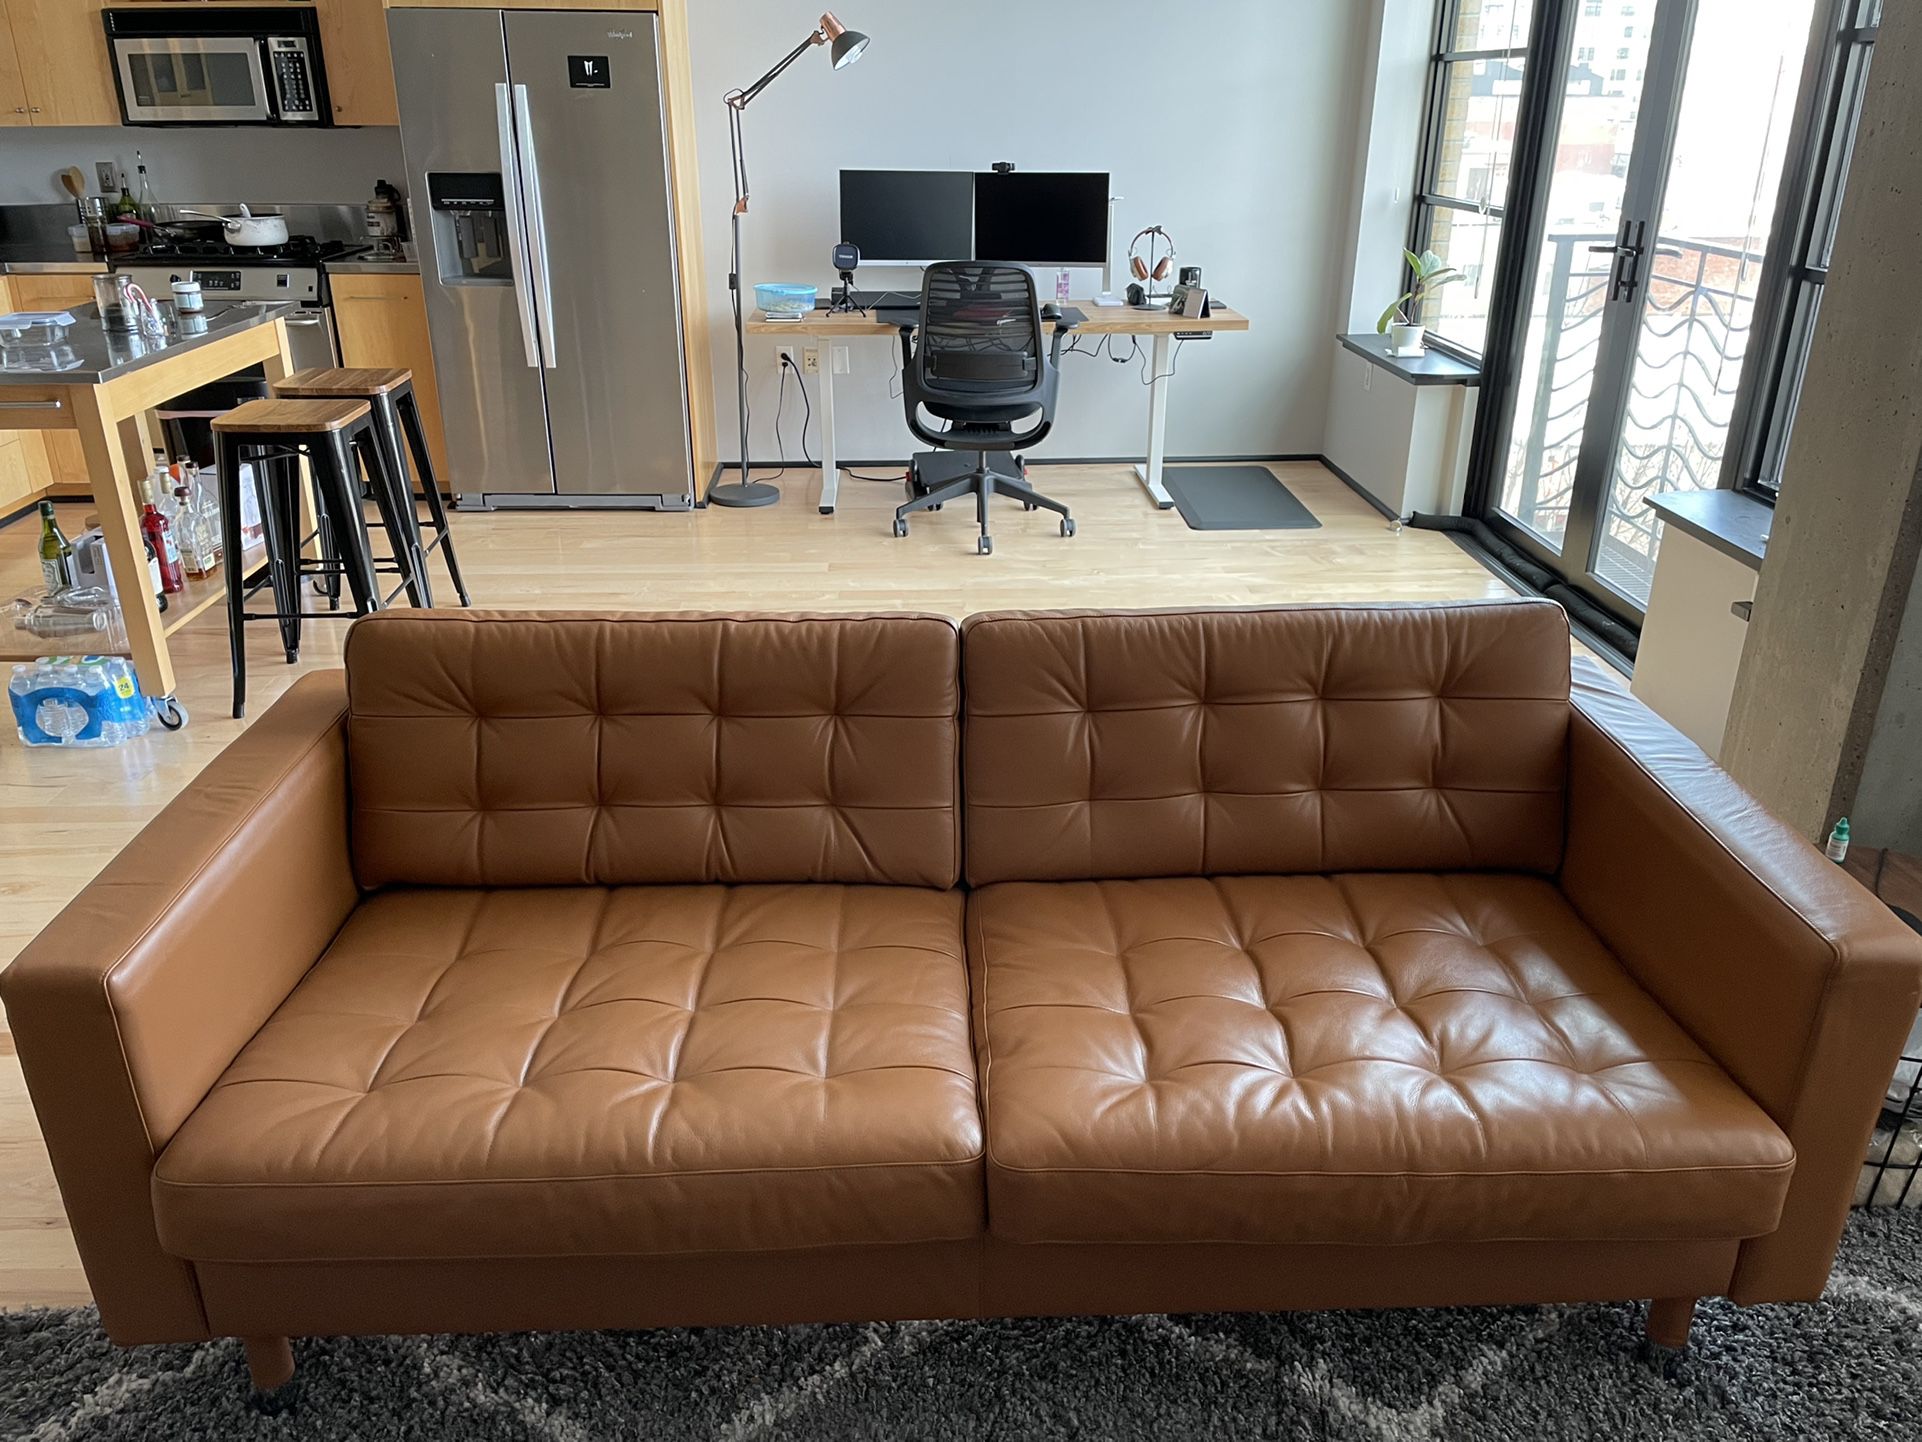 morabo leather sofa review